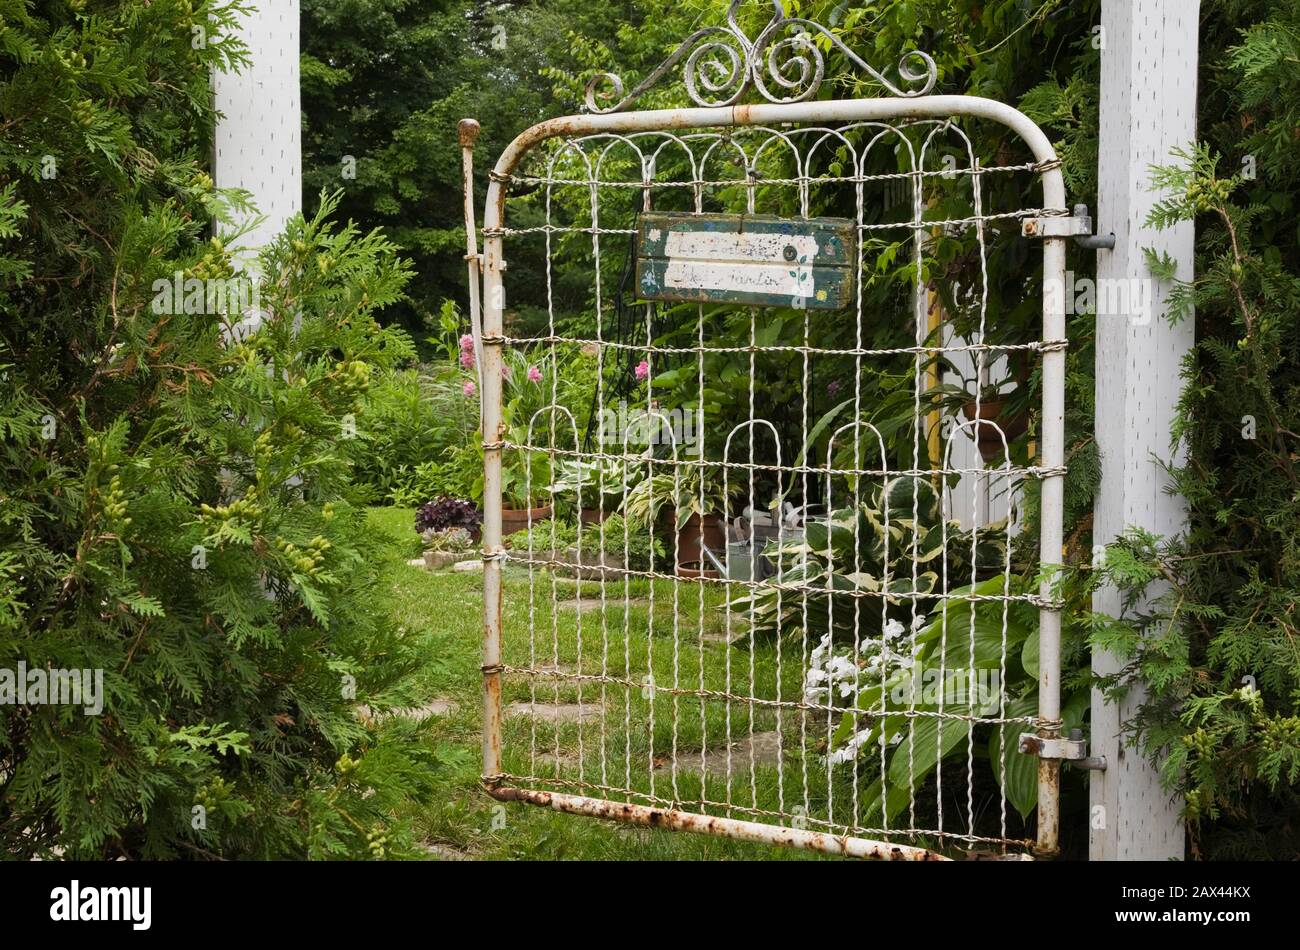 White rusted metal fence gate flanked by Thuja occidentalis - Cedar trees in backyard garden in summer Stock Photo